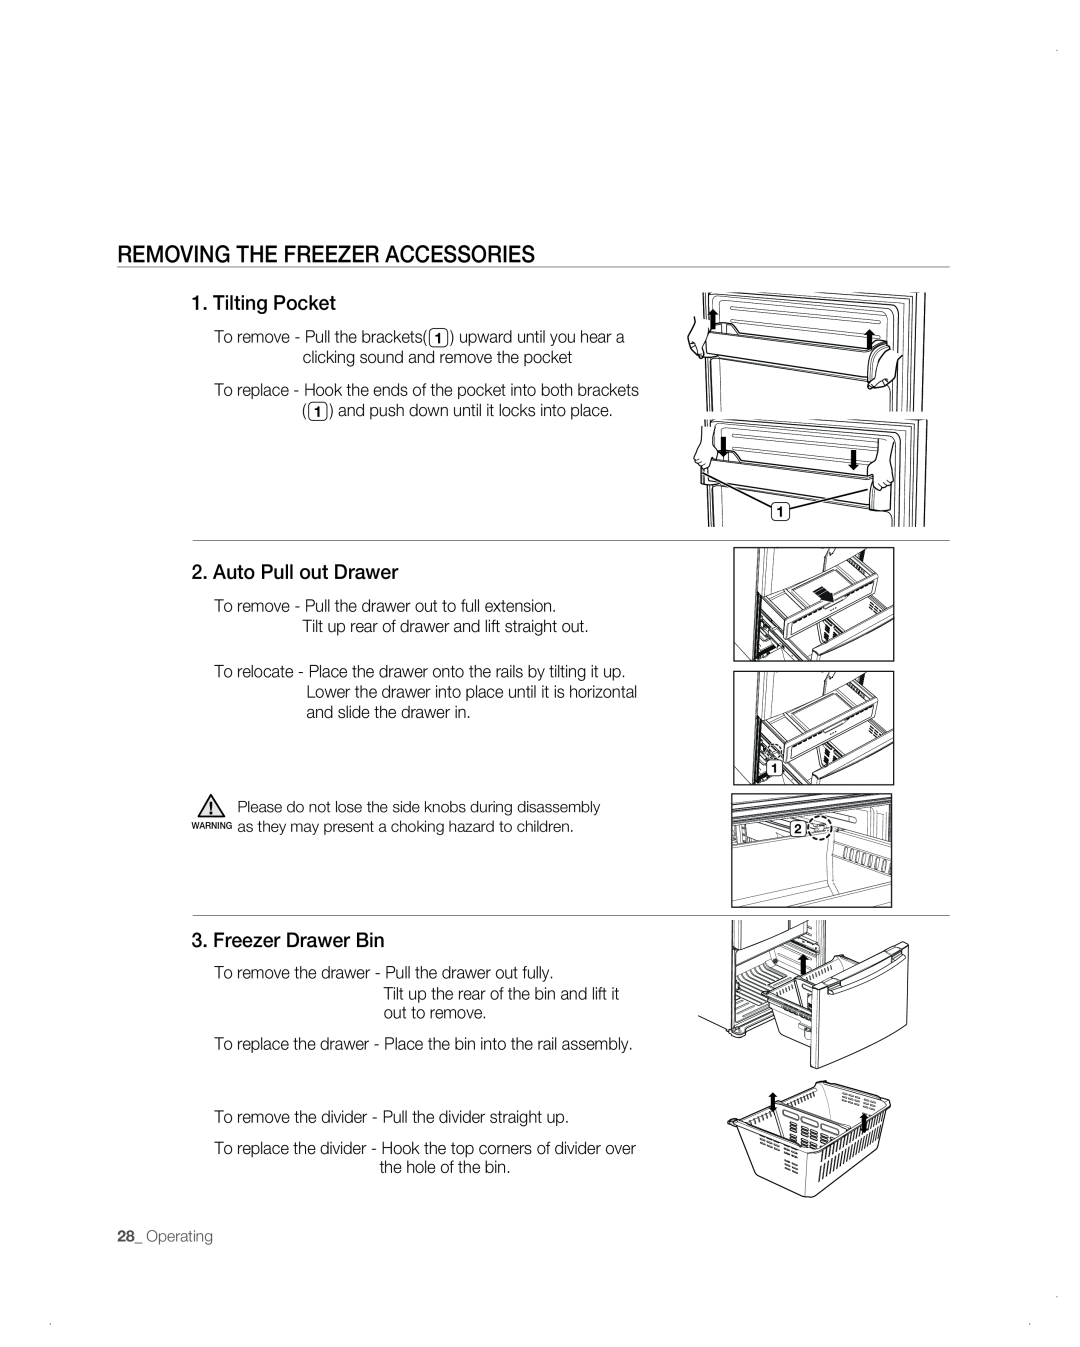 Samsung RF26VAB user manual Removing The Freezer Accessories, Tilting Pocket, Auto Pull out Drawer, Freezer Drawer Bin 